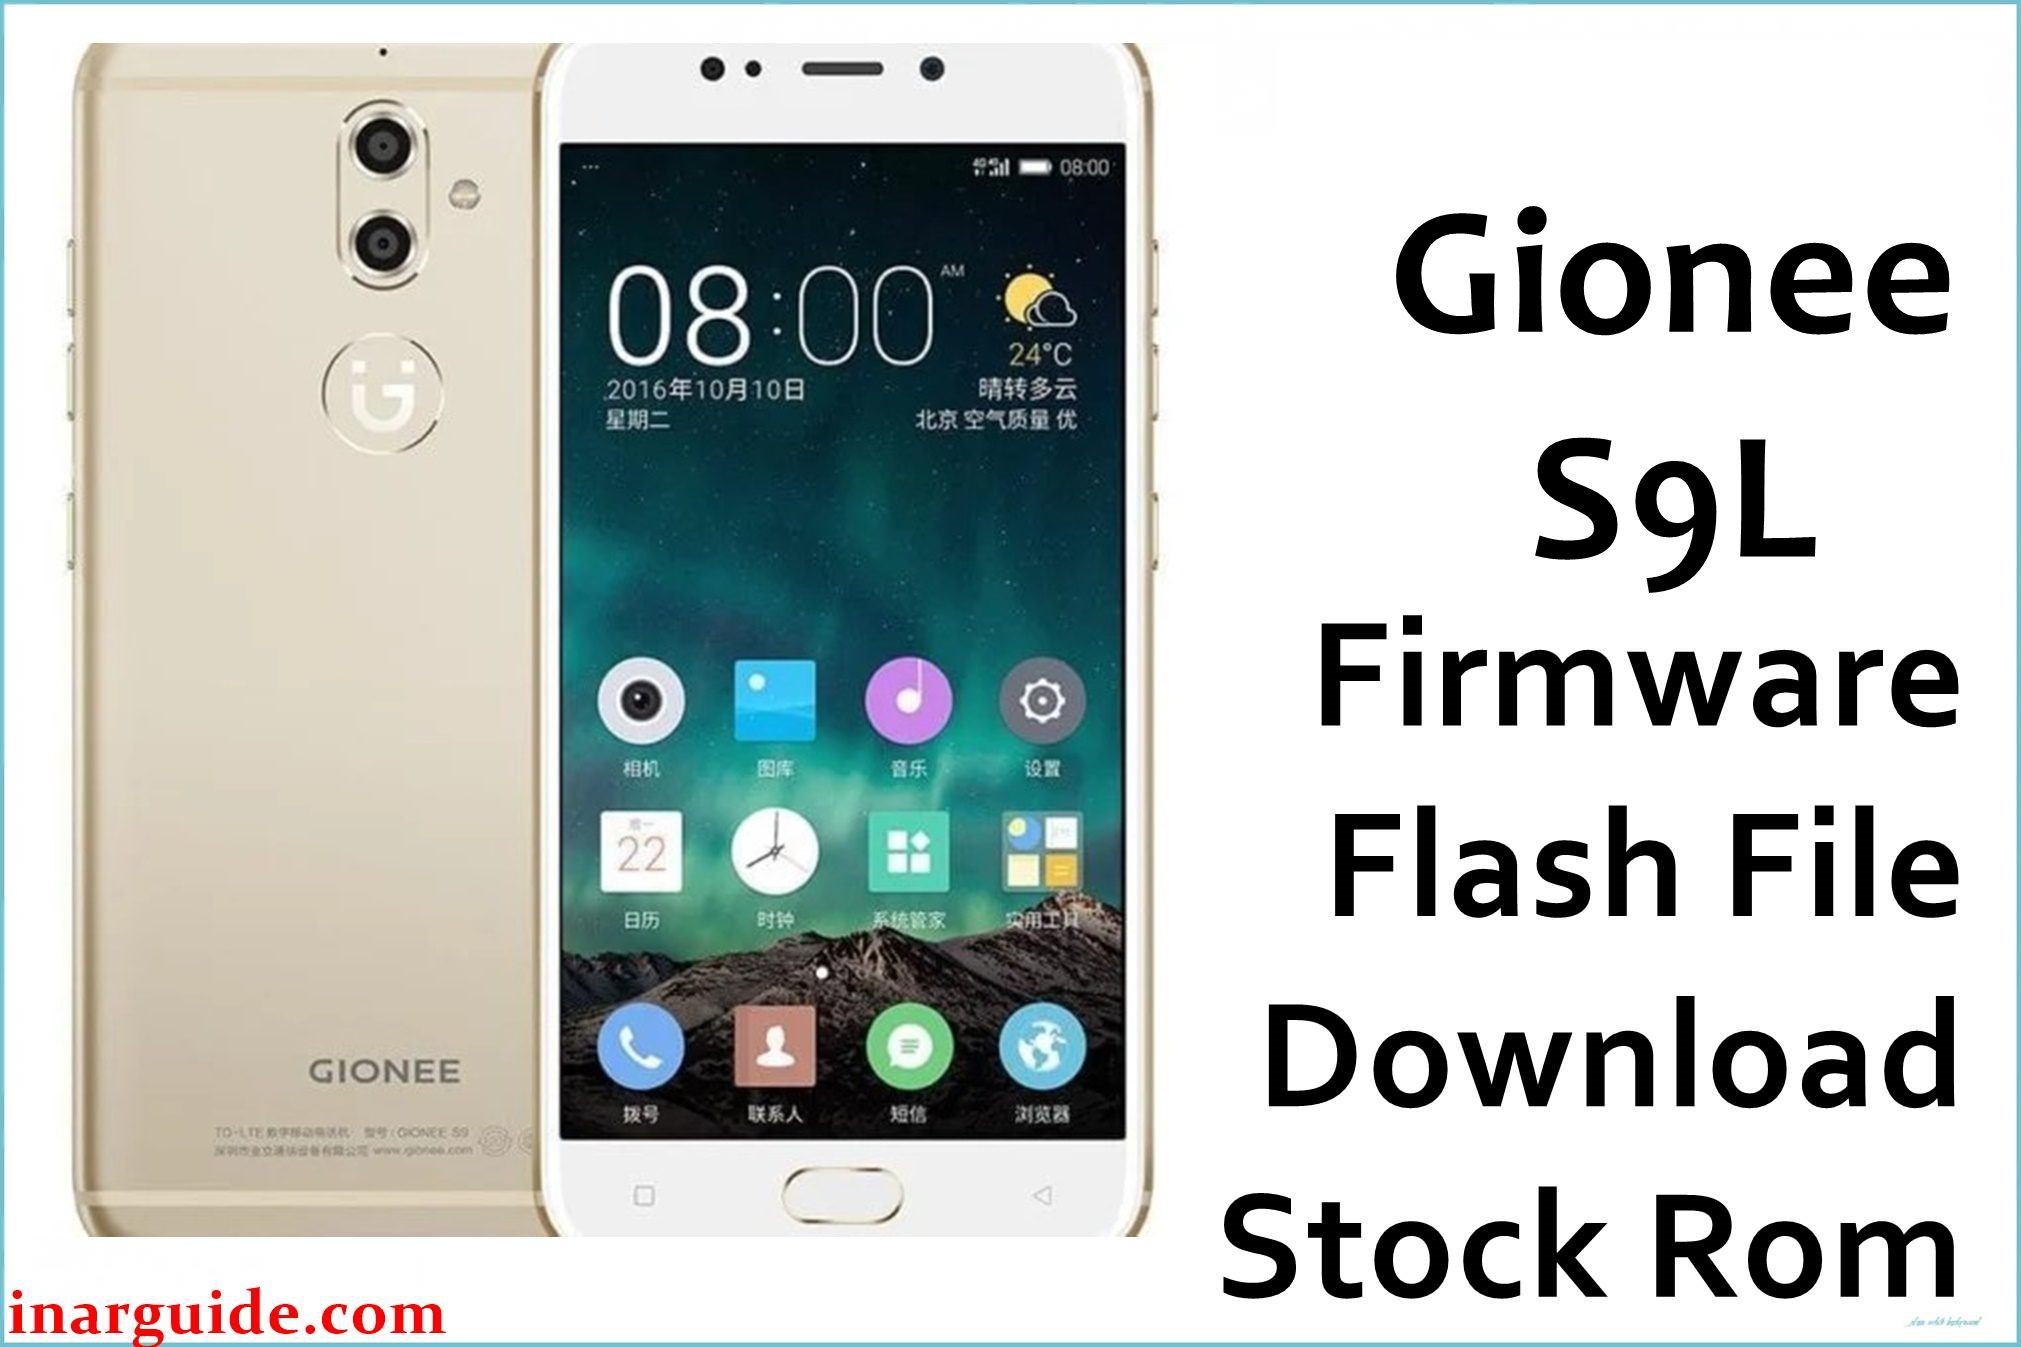 Gionee S9L